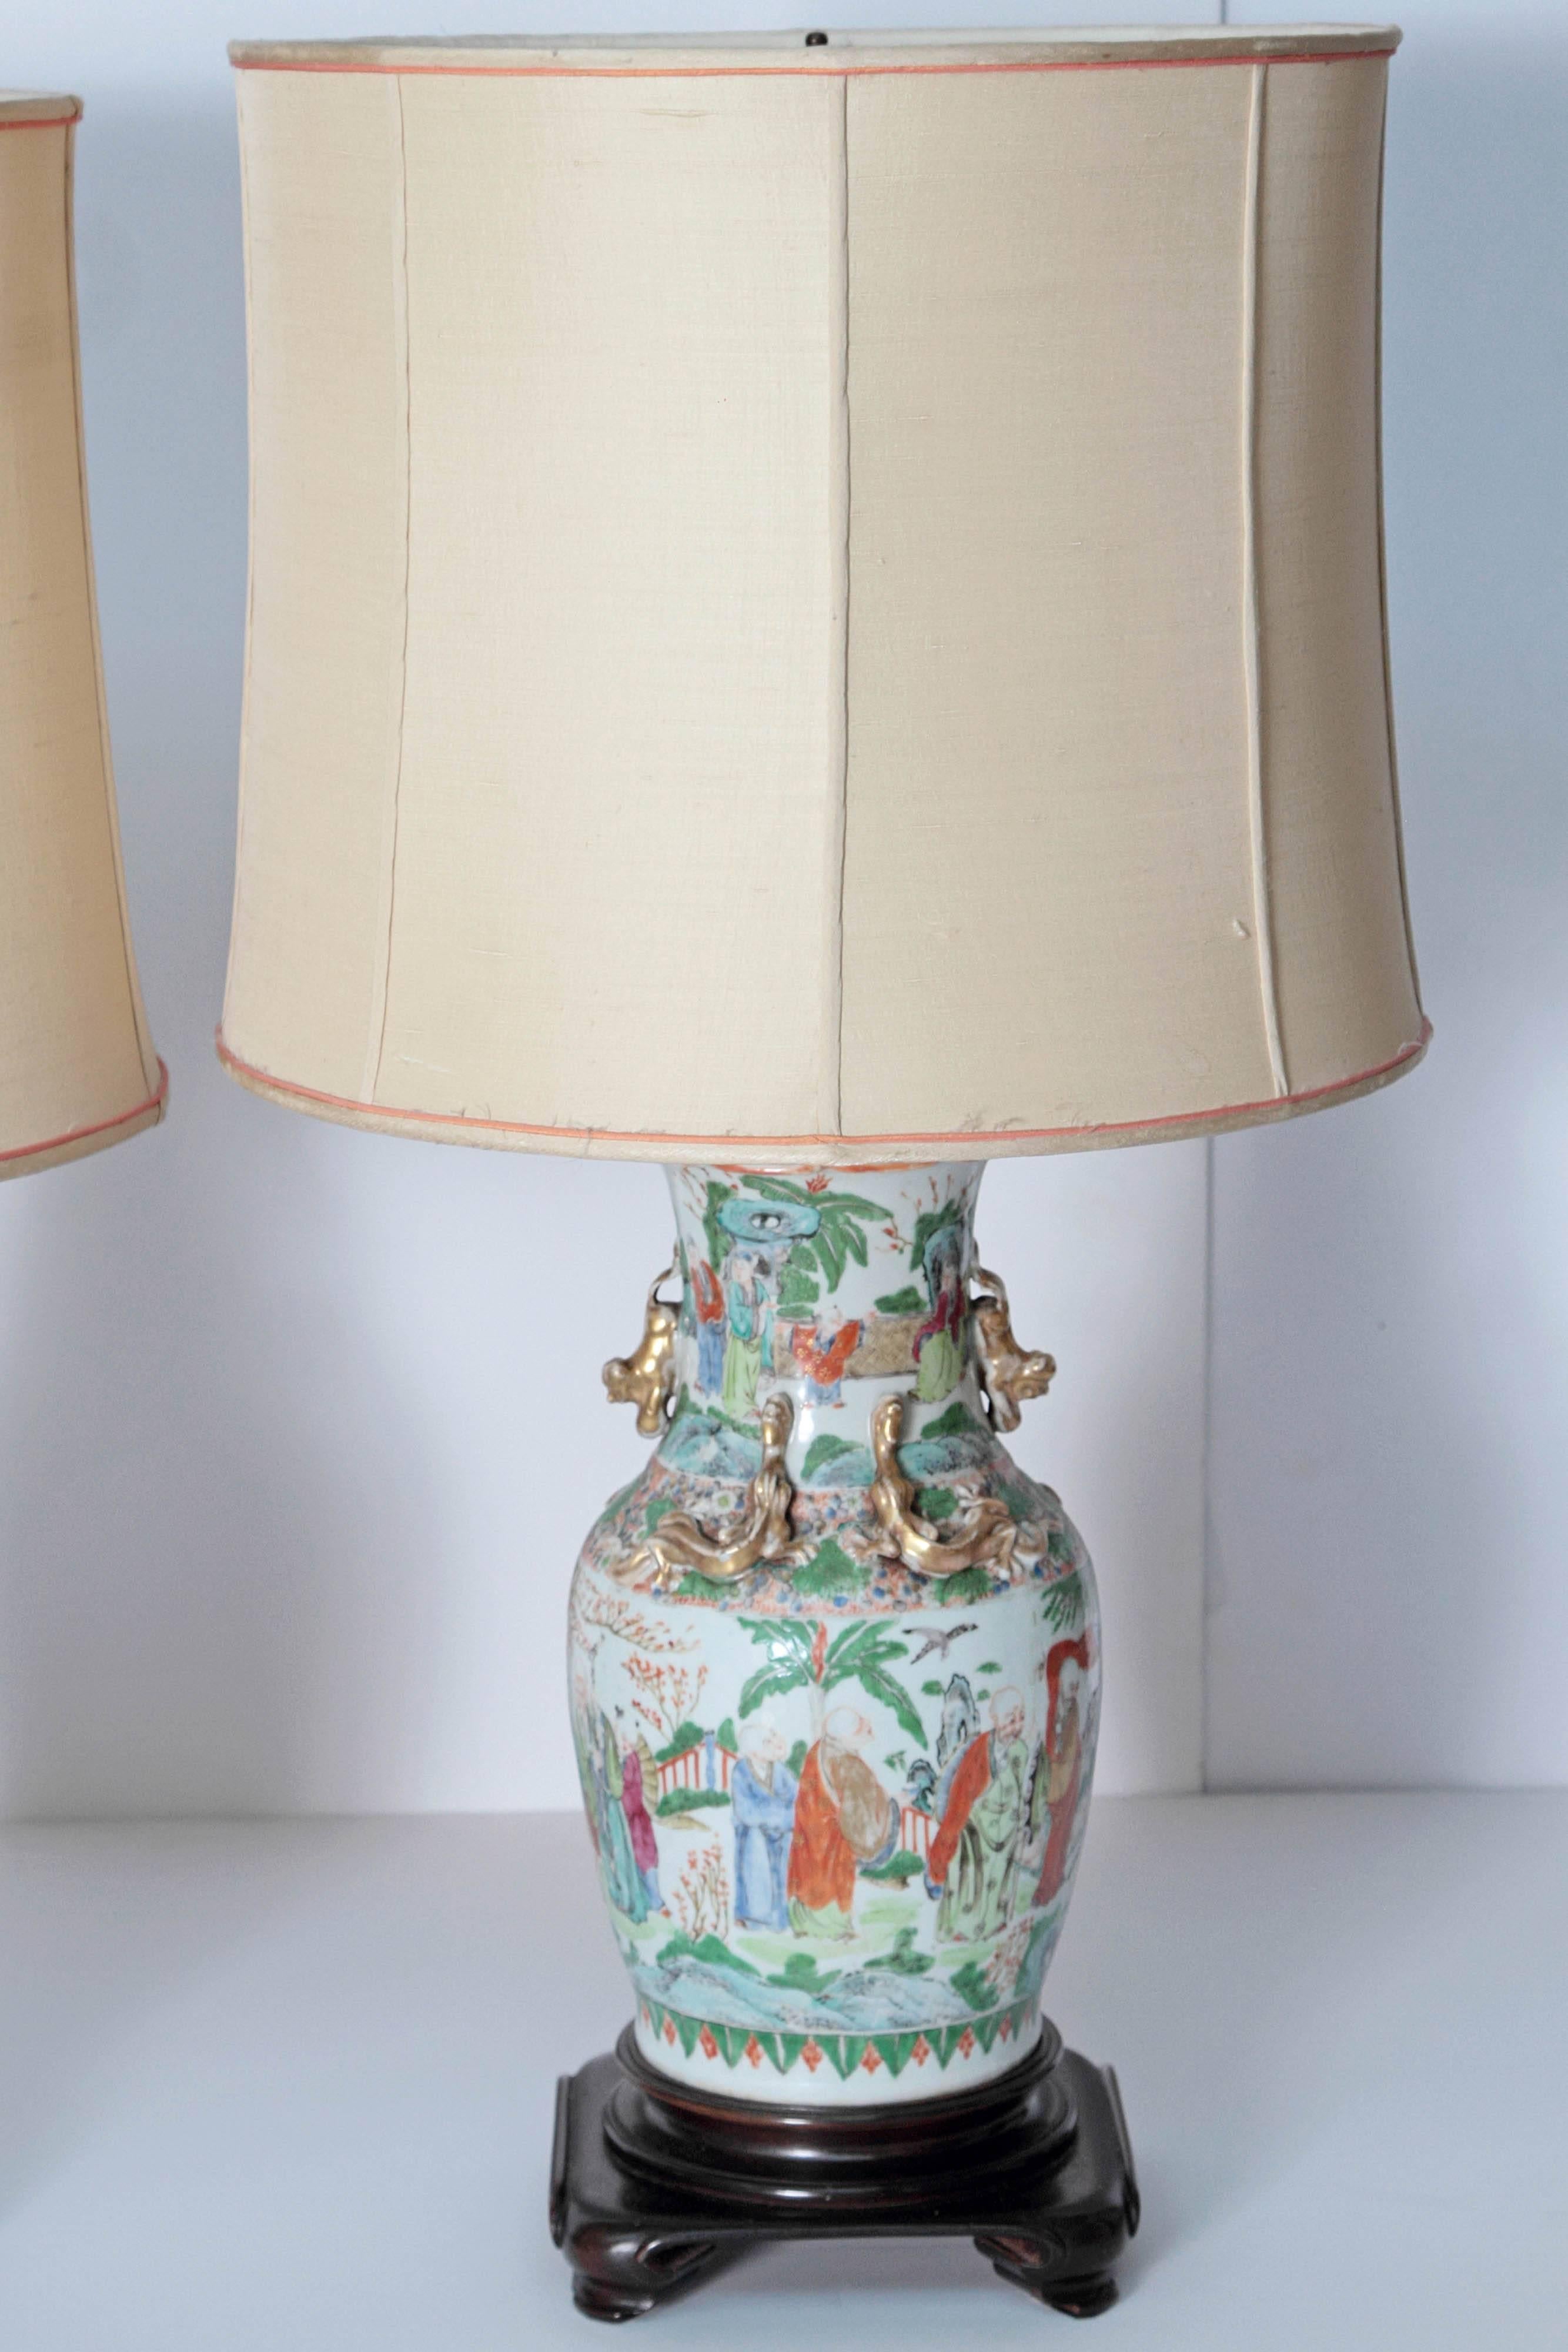 A pair of early 19th century Chinese porcelain vases mounted as lamps. White background with predominately orange and green wise men in landscape. Gilt dragon and foo dogs at shoulders.
Silk shade trimmed in rose. Vases mounted to wooden